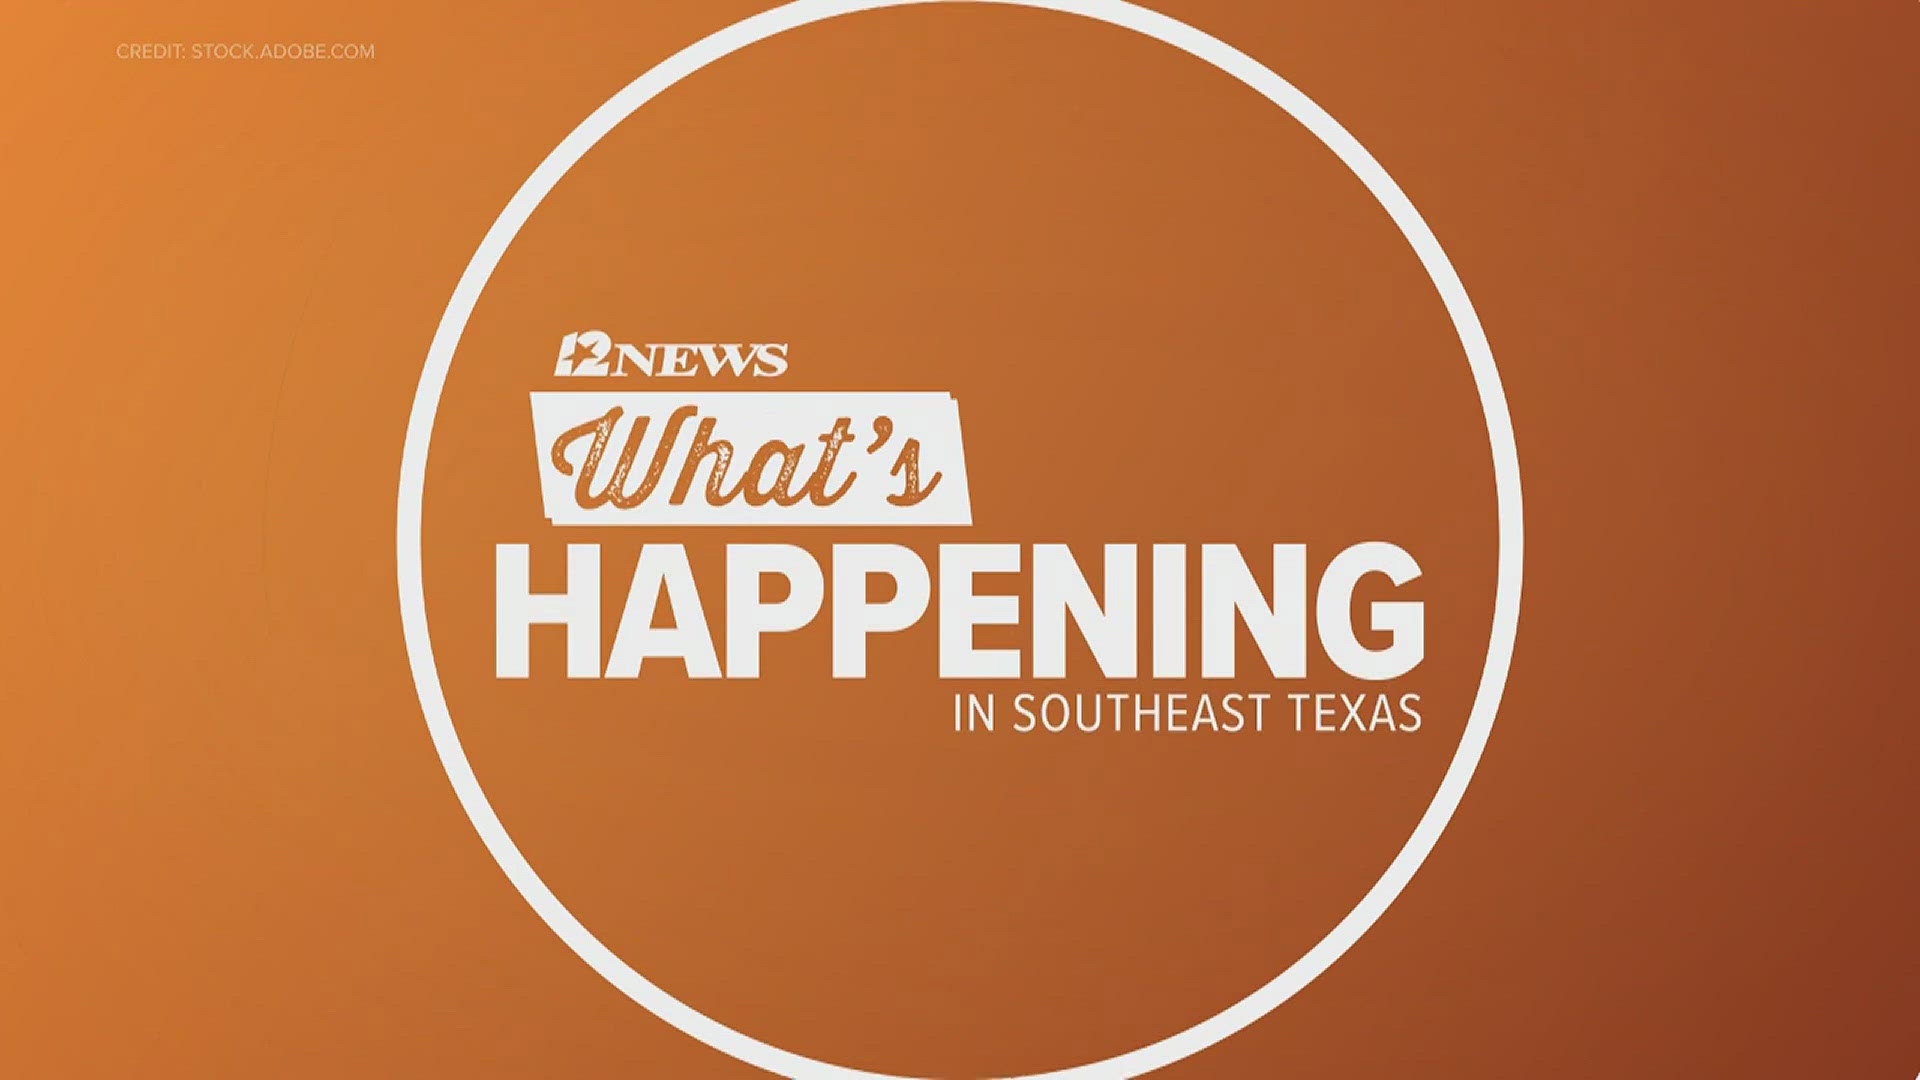 Find out what's happening in Southeast Texas over the weekend.